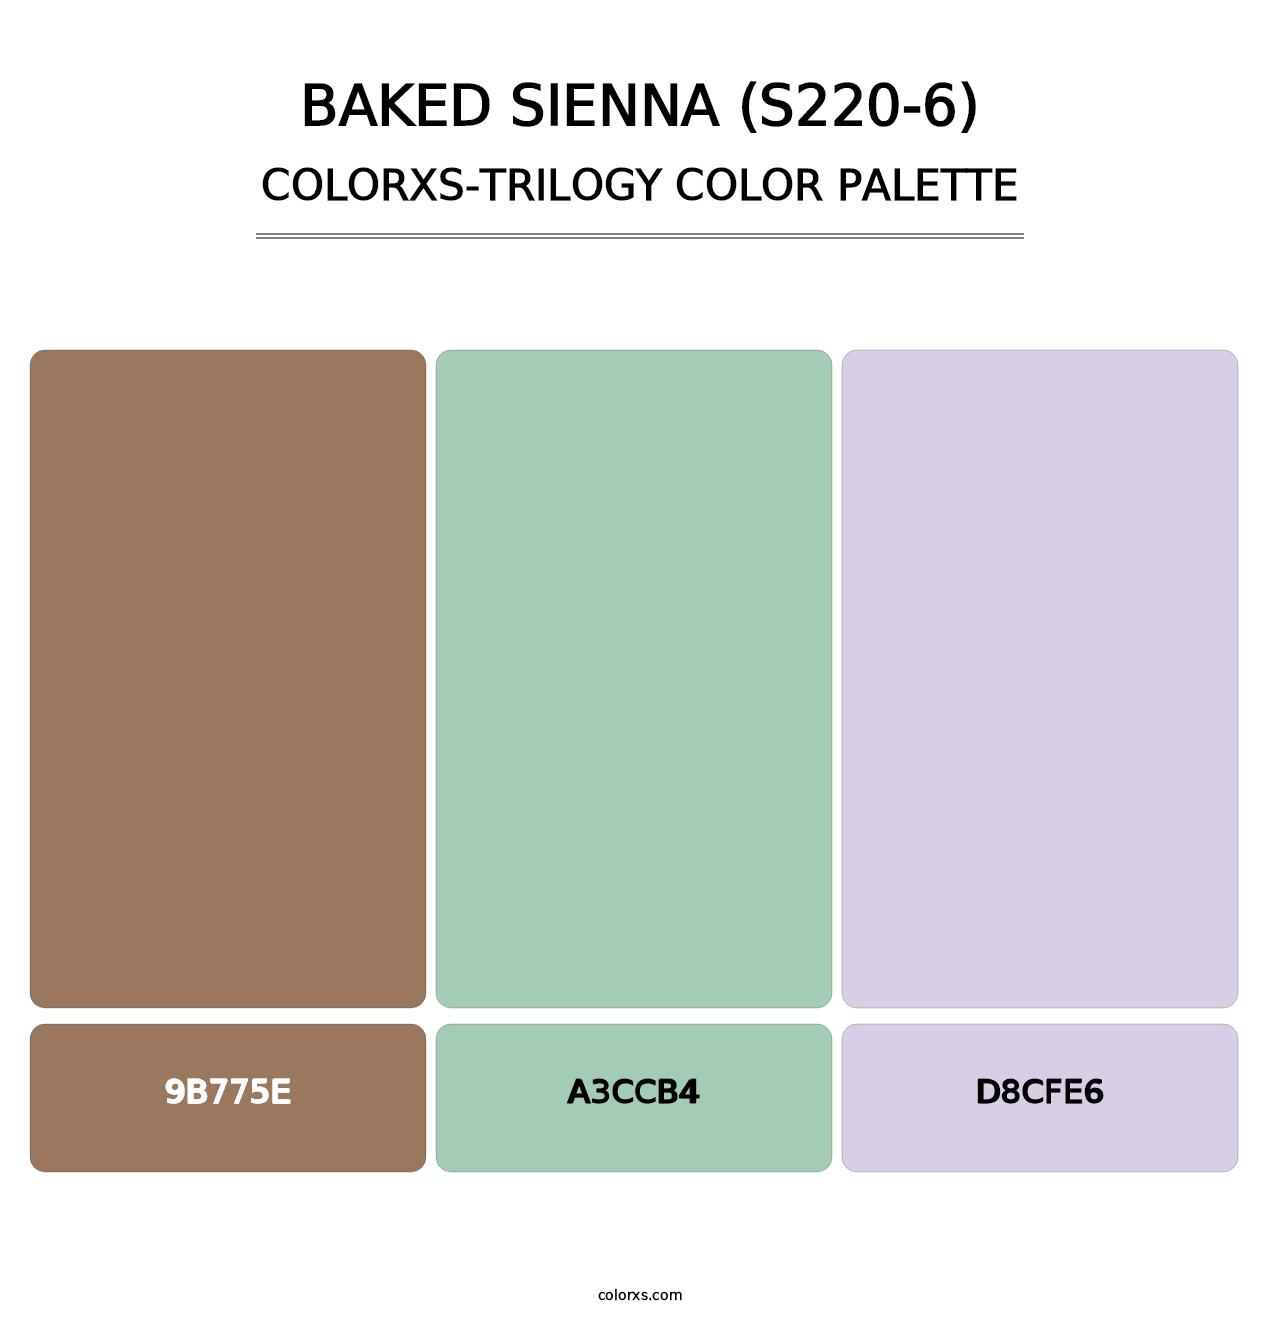 Baked Sienna (S220-6) - Colorxs Trilogy Palette